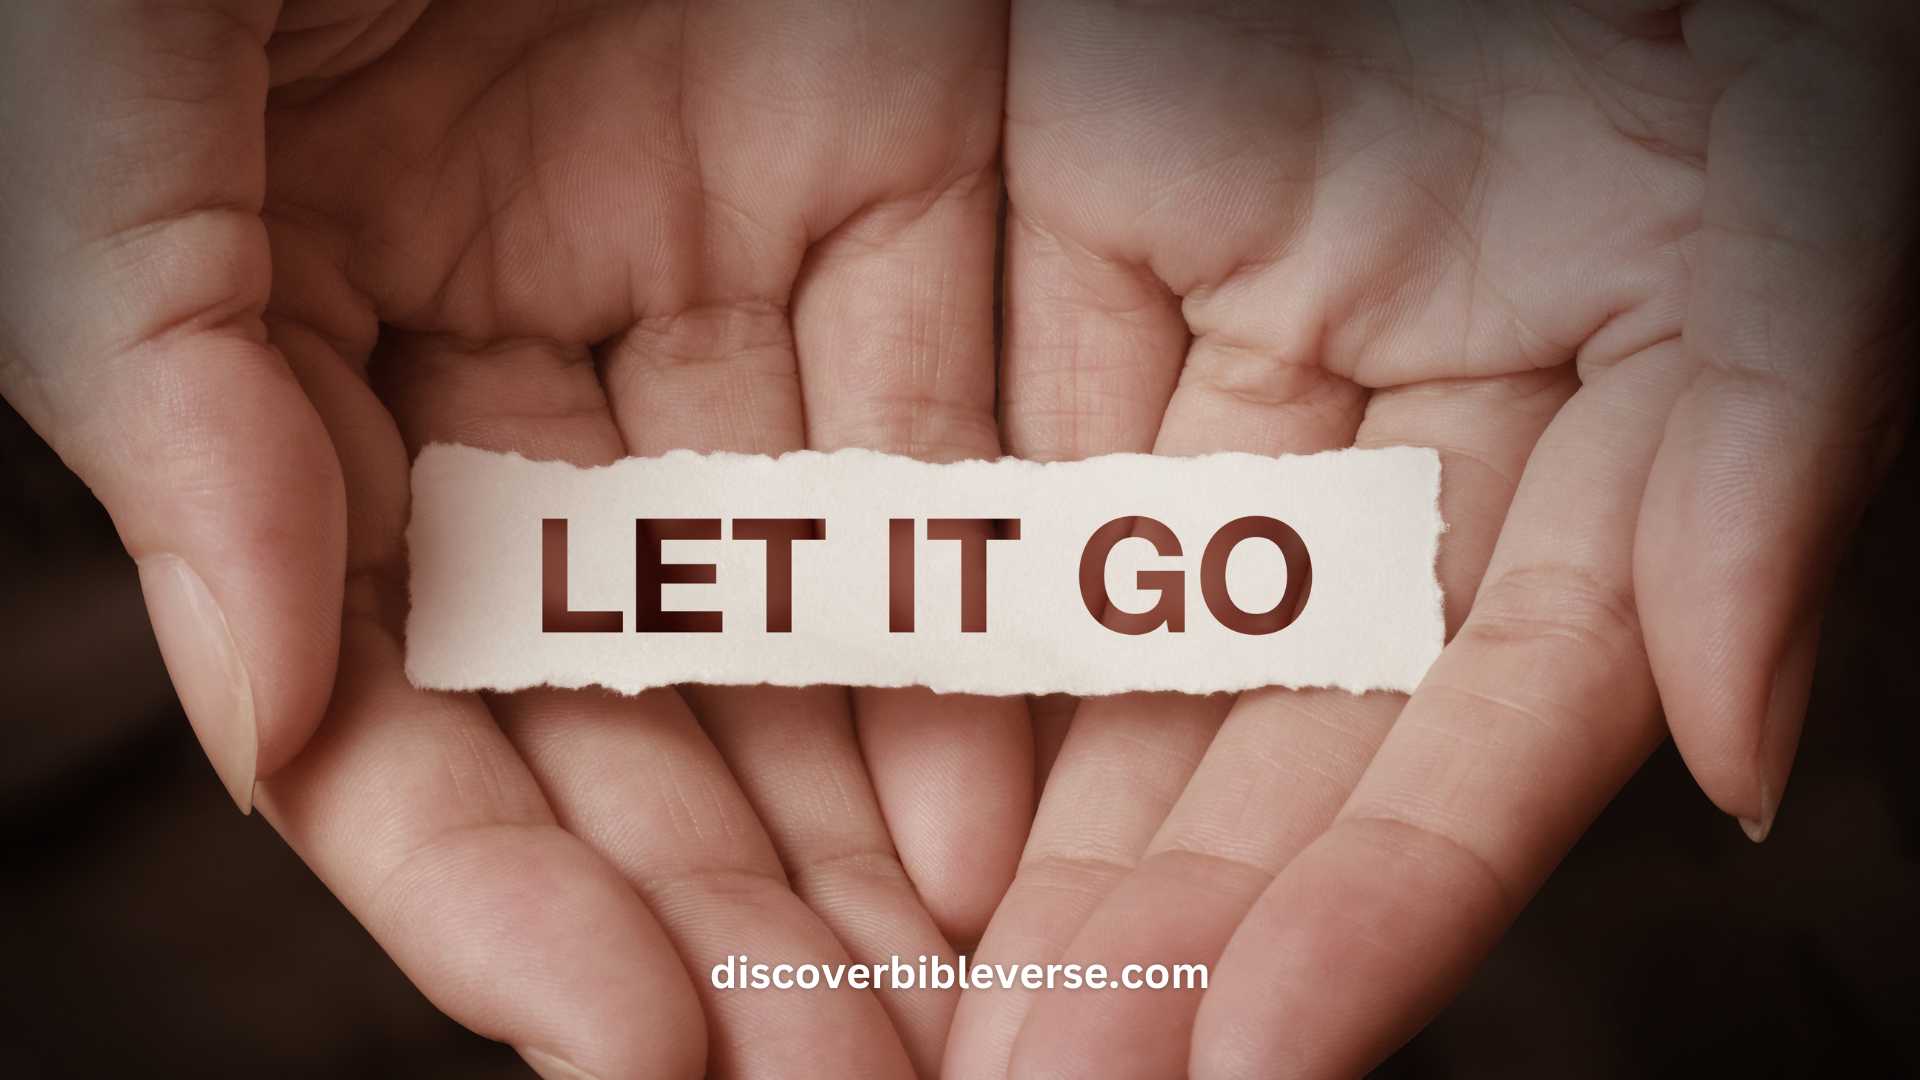 What Does the Bible Teach Us About Letting Go of Someone We Love?